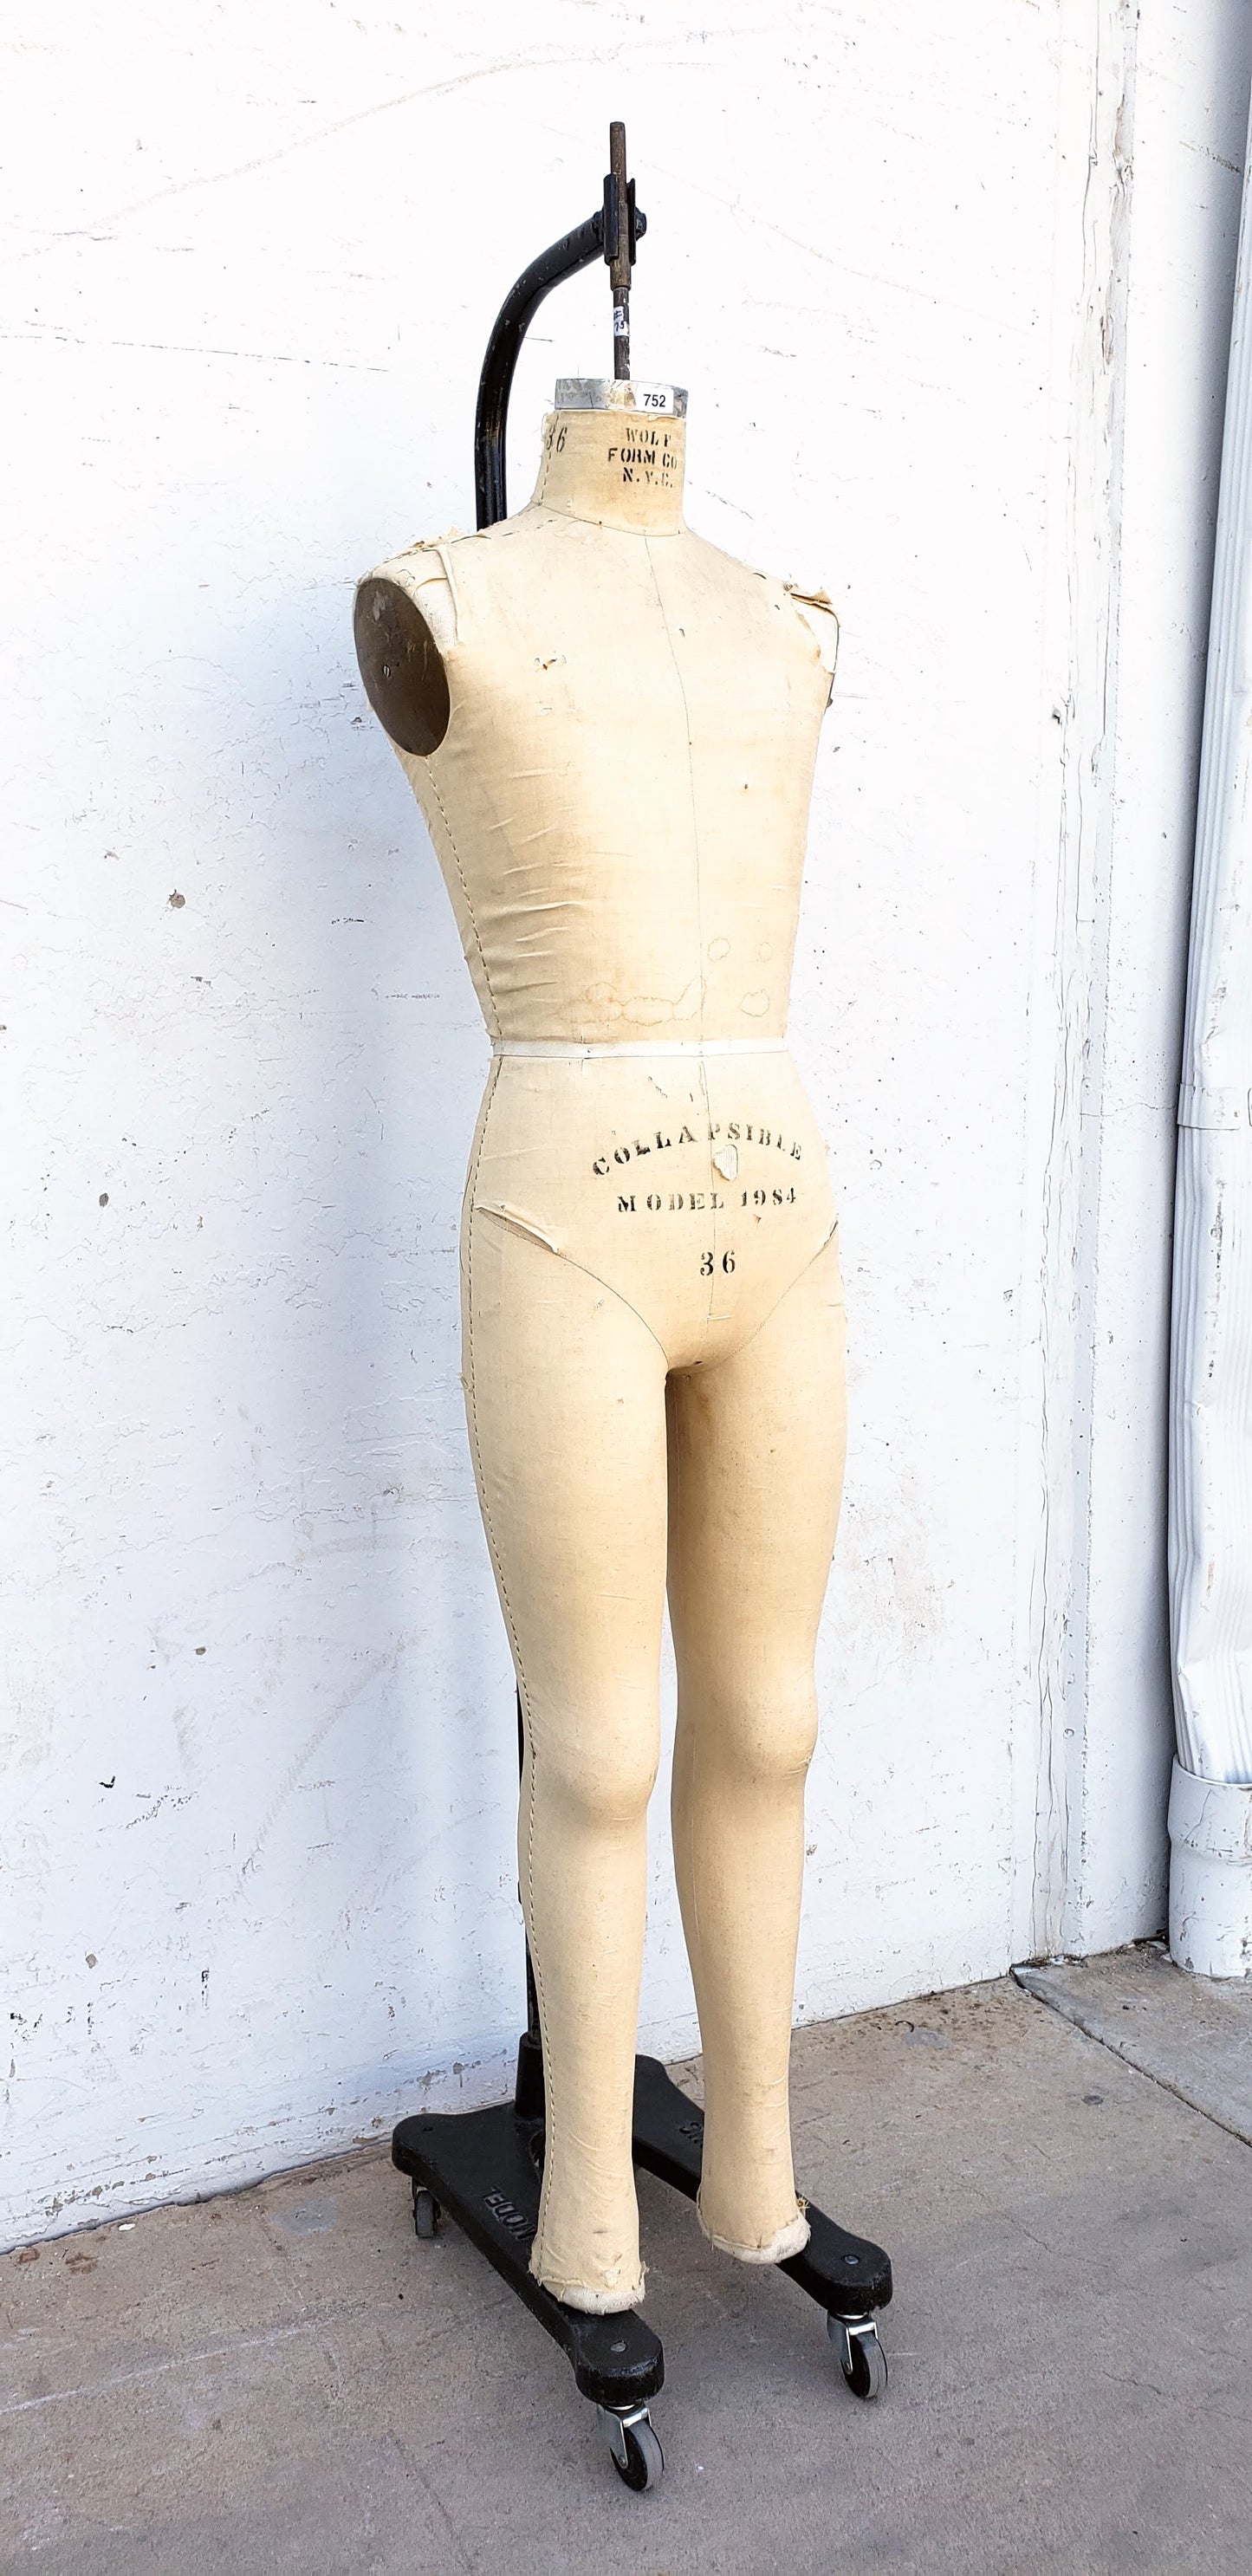 Male Mannequin Form